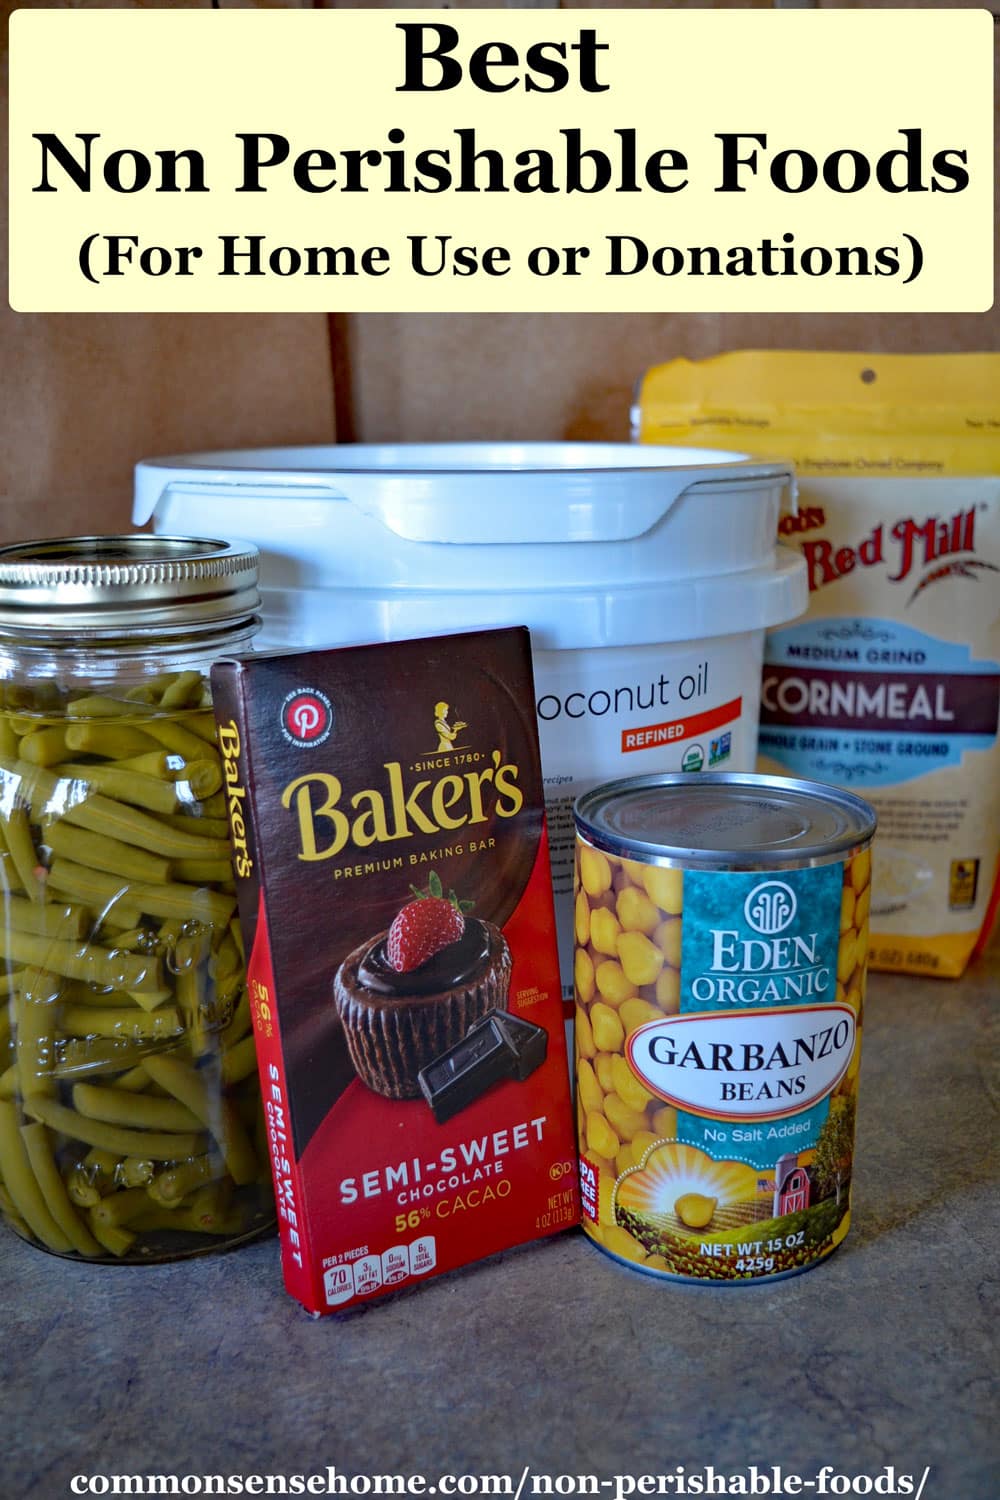 Best Non Perishable Foods (For Home Use or Donations)